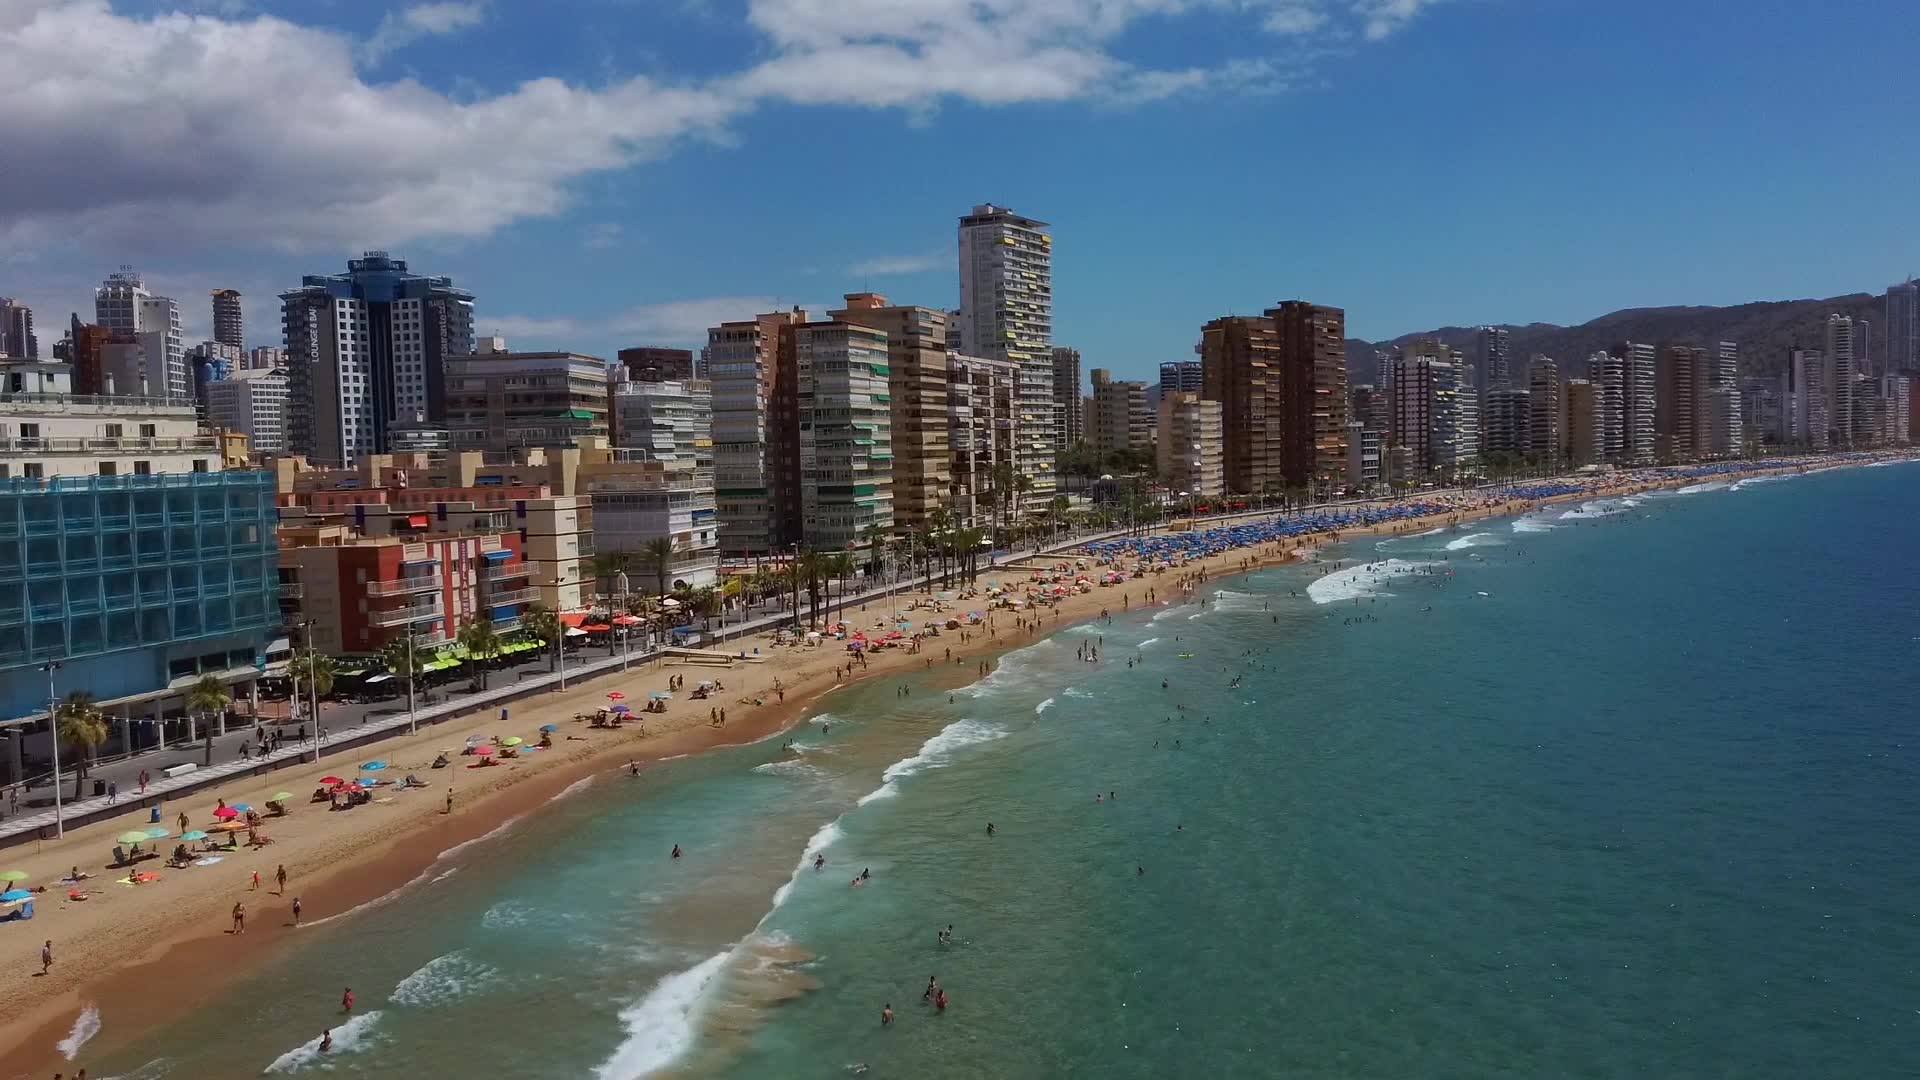 Benidorm faces quiet Christmas as hotels close due to UK booking cancellations across Spain's Costa Blanca